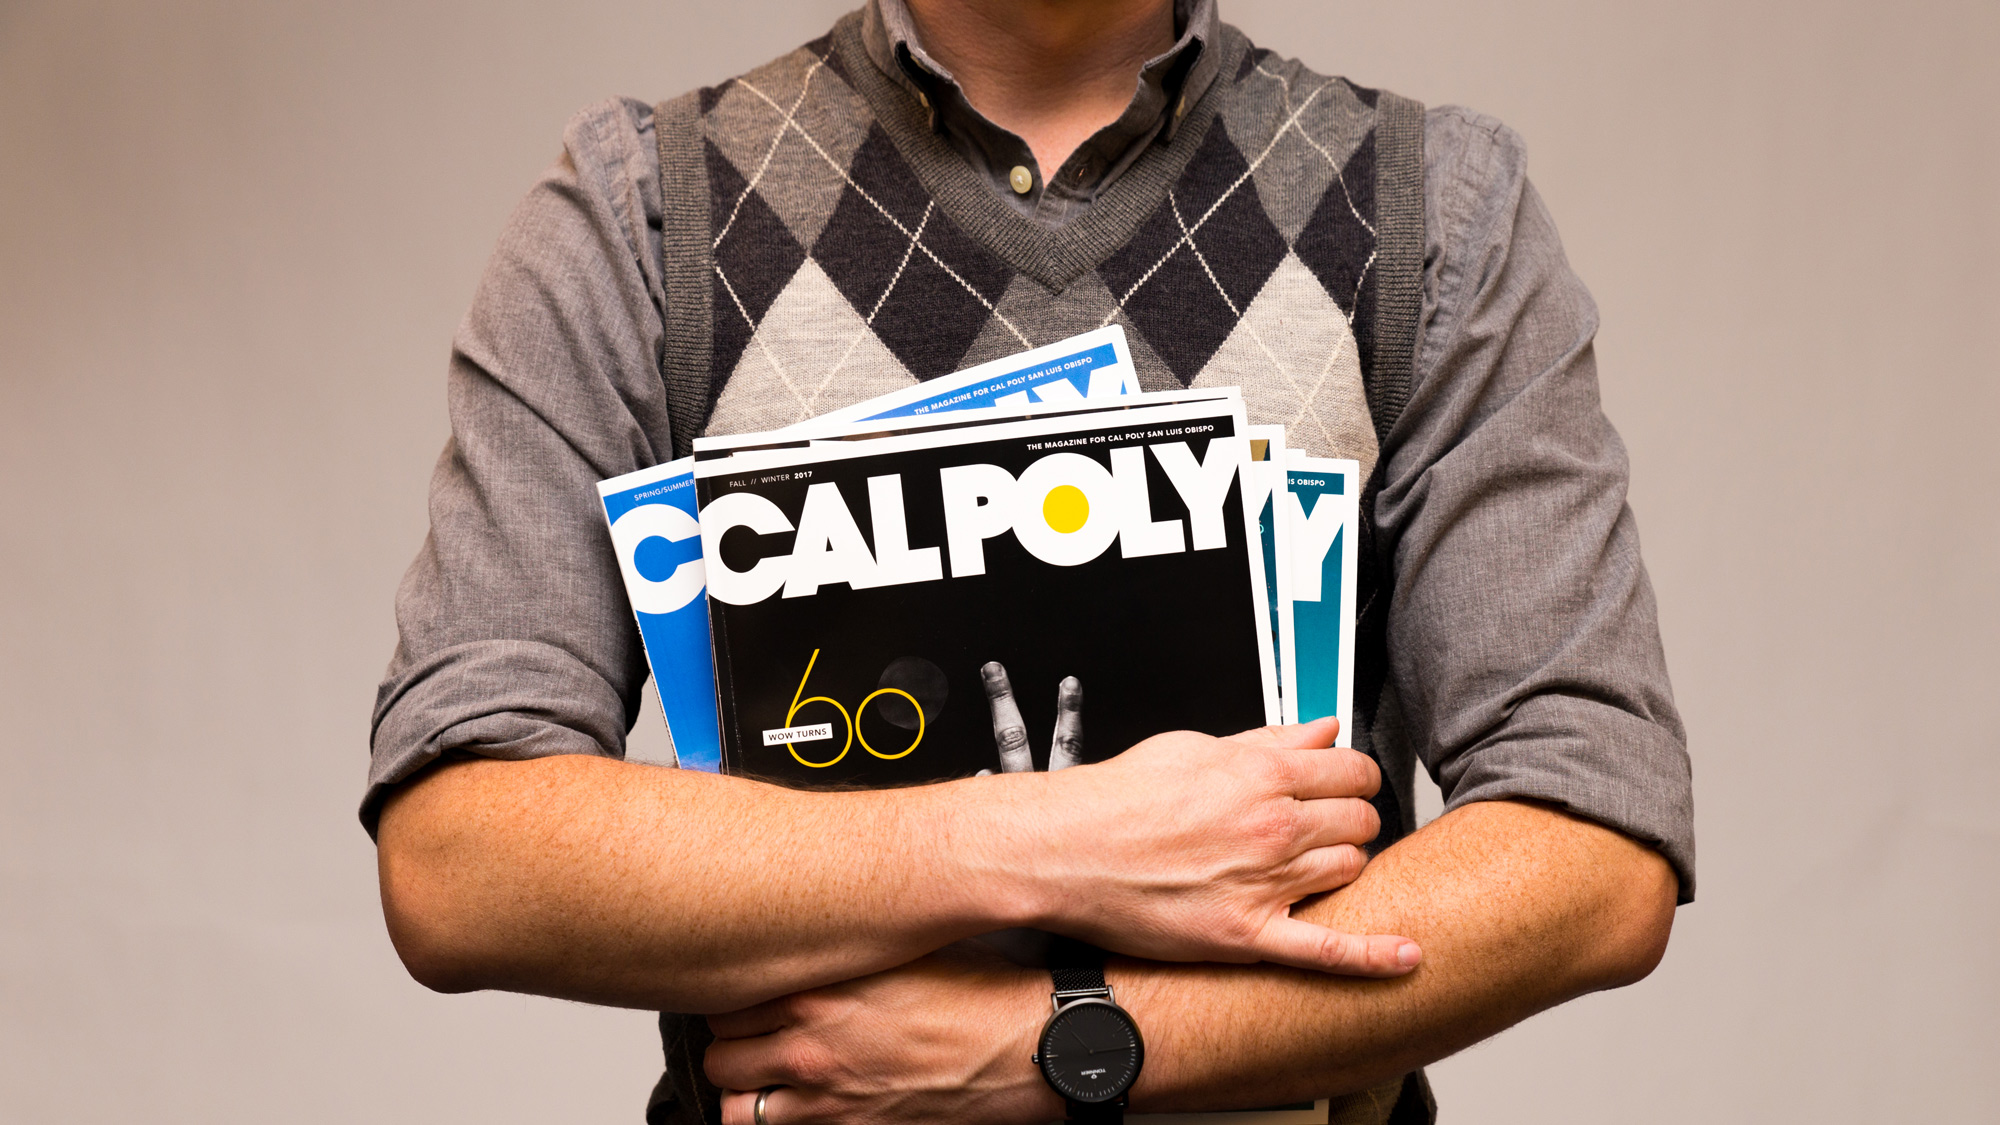 A man in a grey shirt holds a stack of Cal Poly Magazine copies